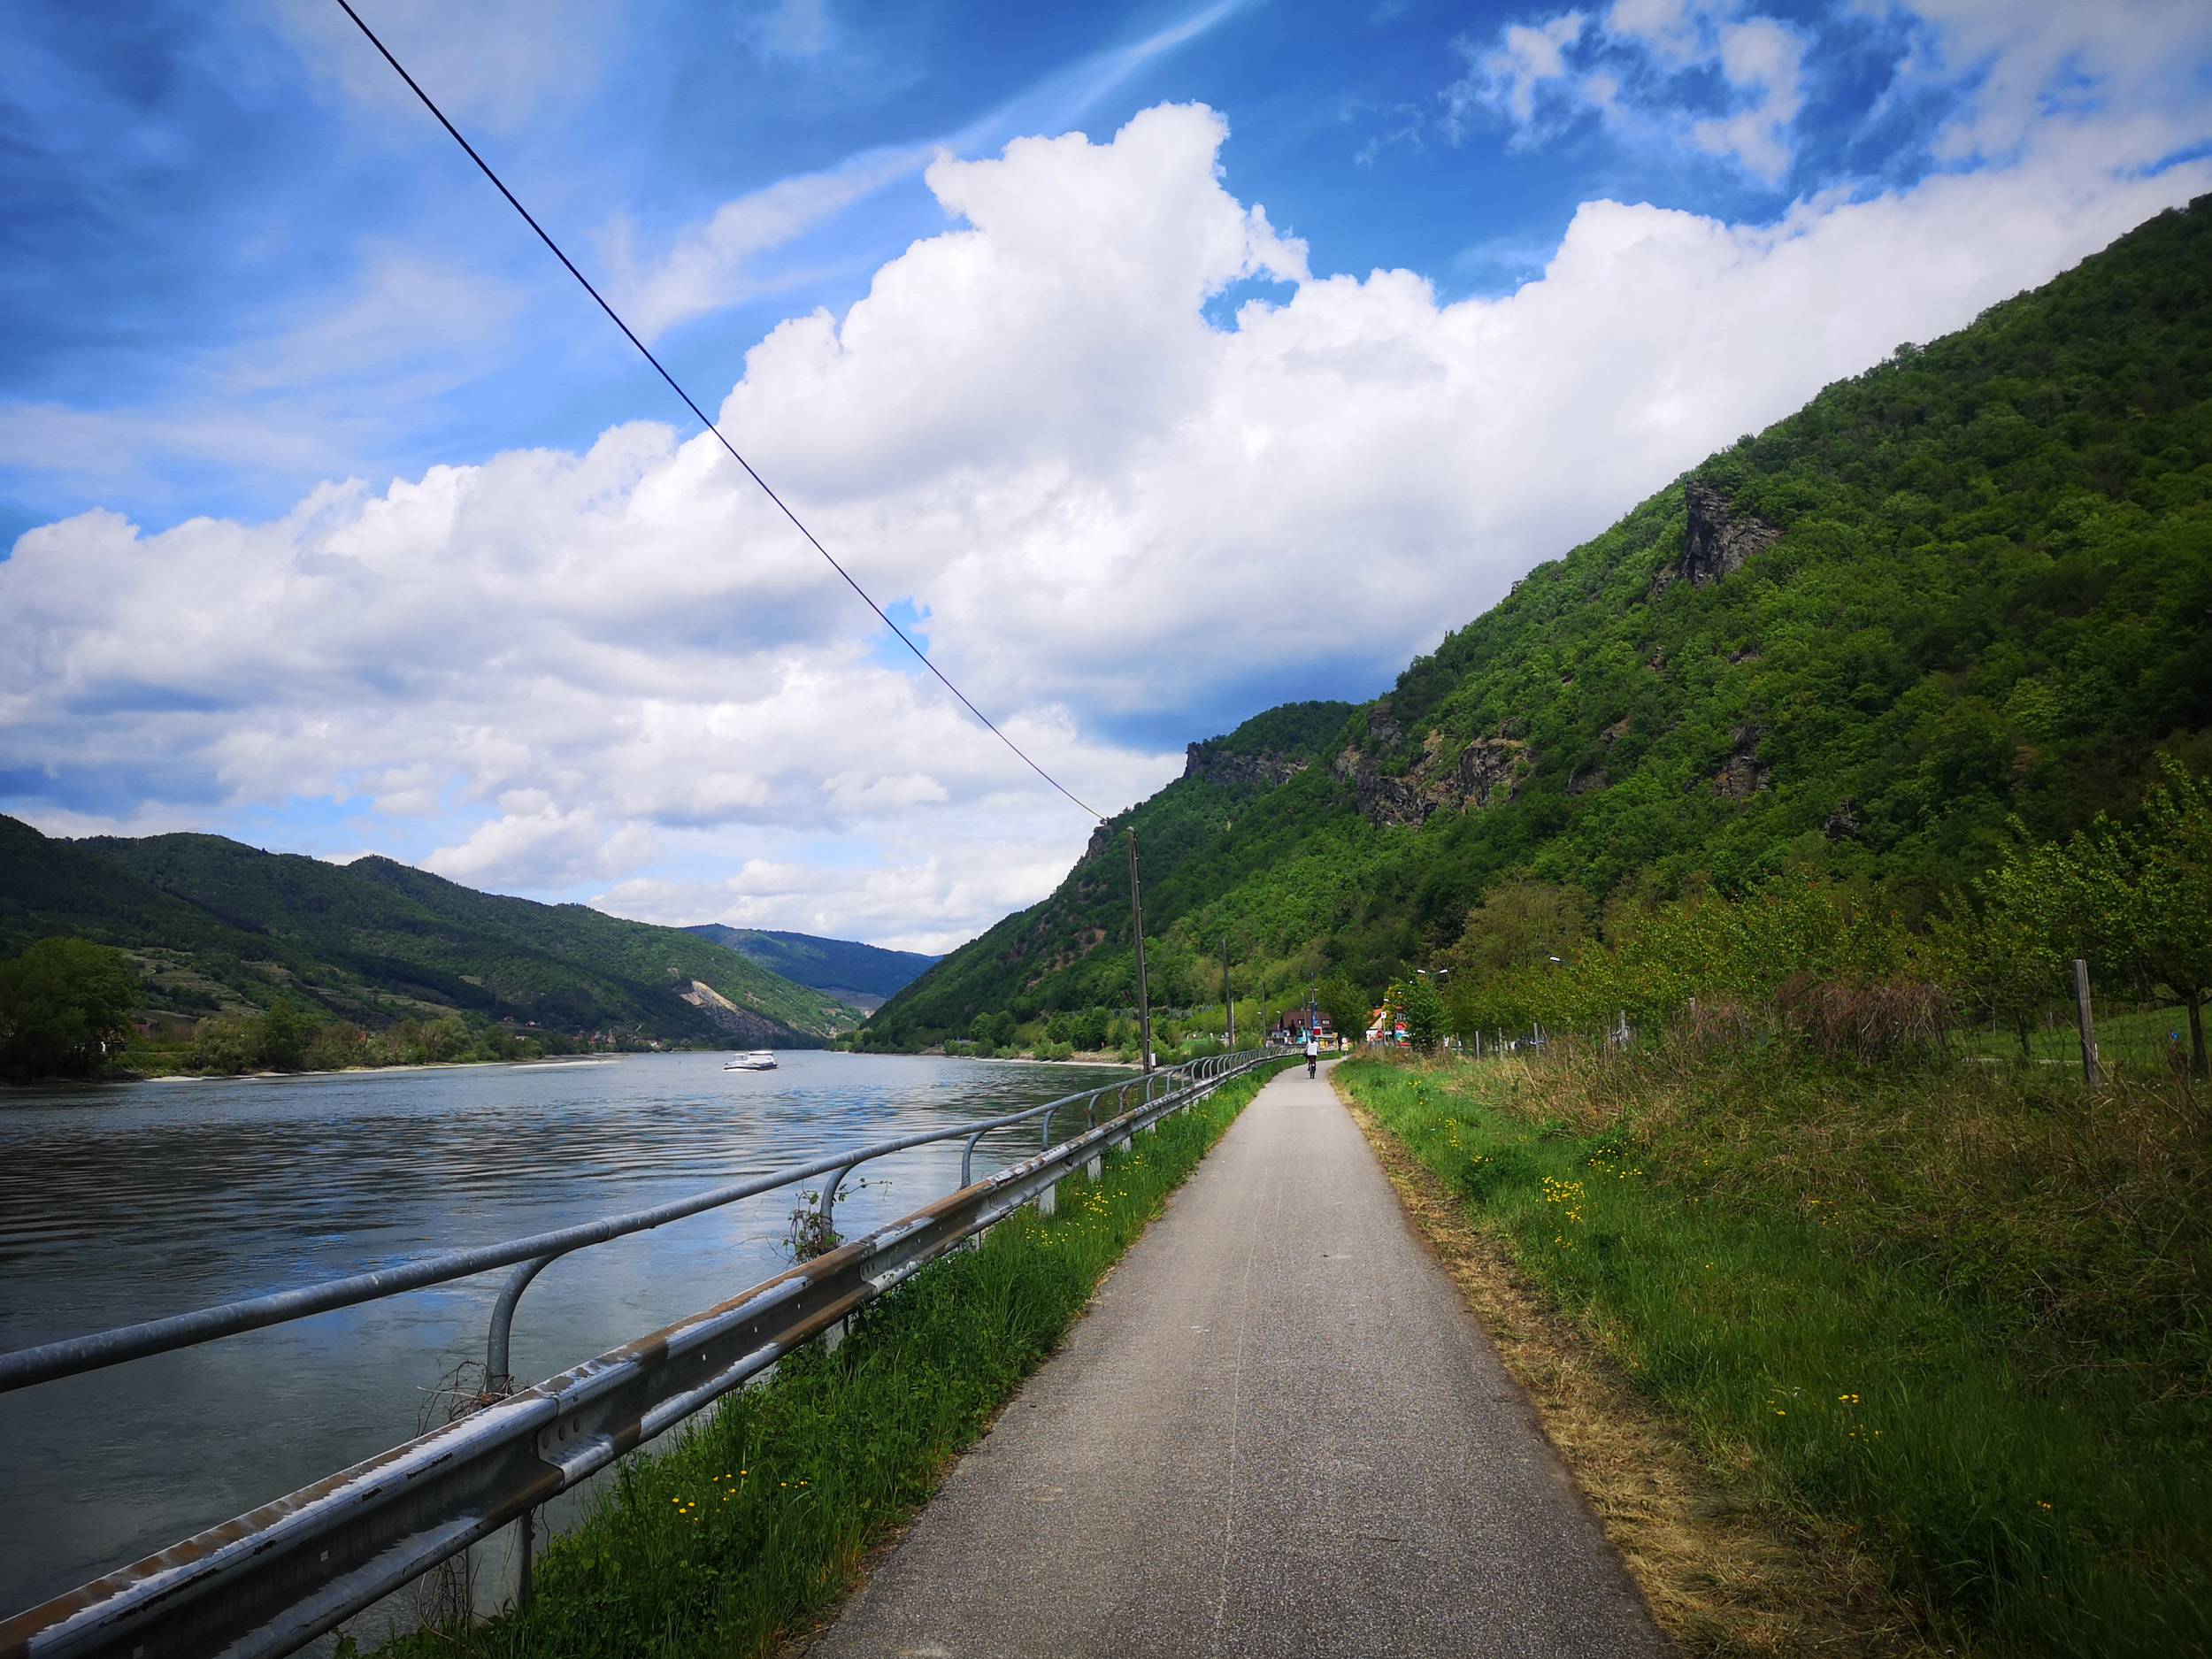 RIding a bike on the right side of Danube in Wachau Valley, Austria